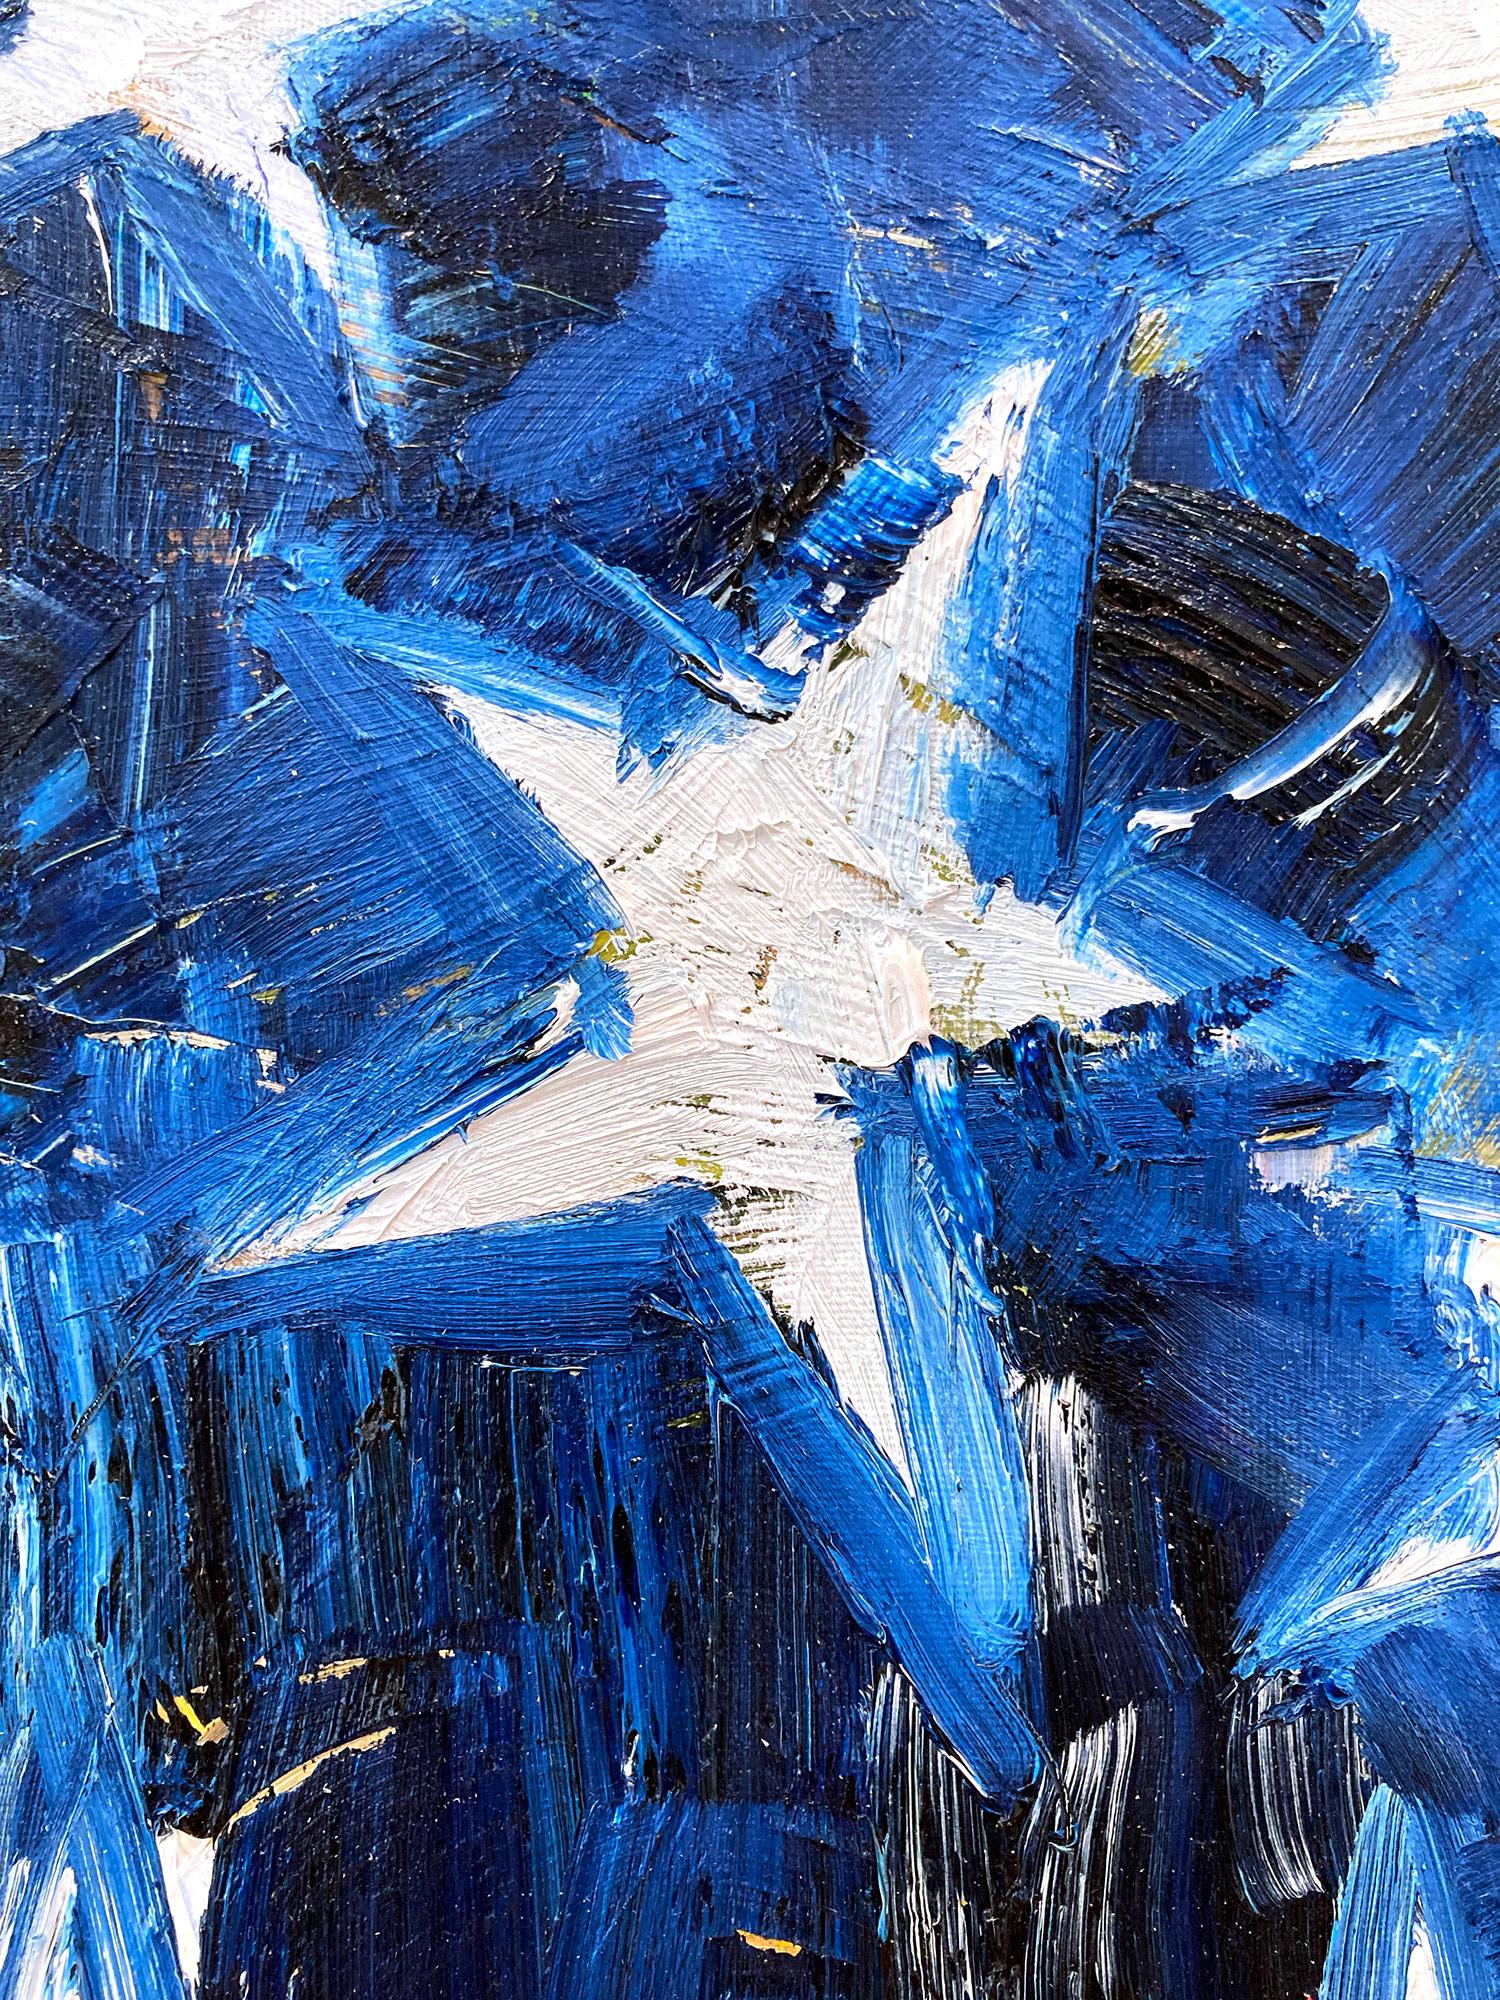 Motivated by bold color and fast brushwork, we are moved by the simplicity and thick textured oil paints in these works. Shaoul’s “My Stars Collection” is a vibrant and energetic display of love encapsulated, leaving us with impressions of color and